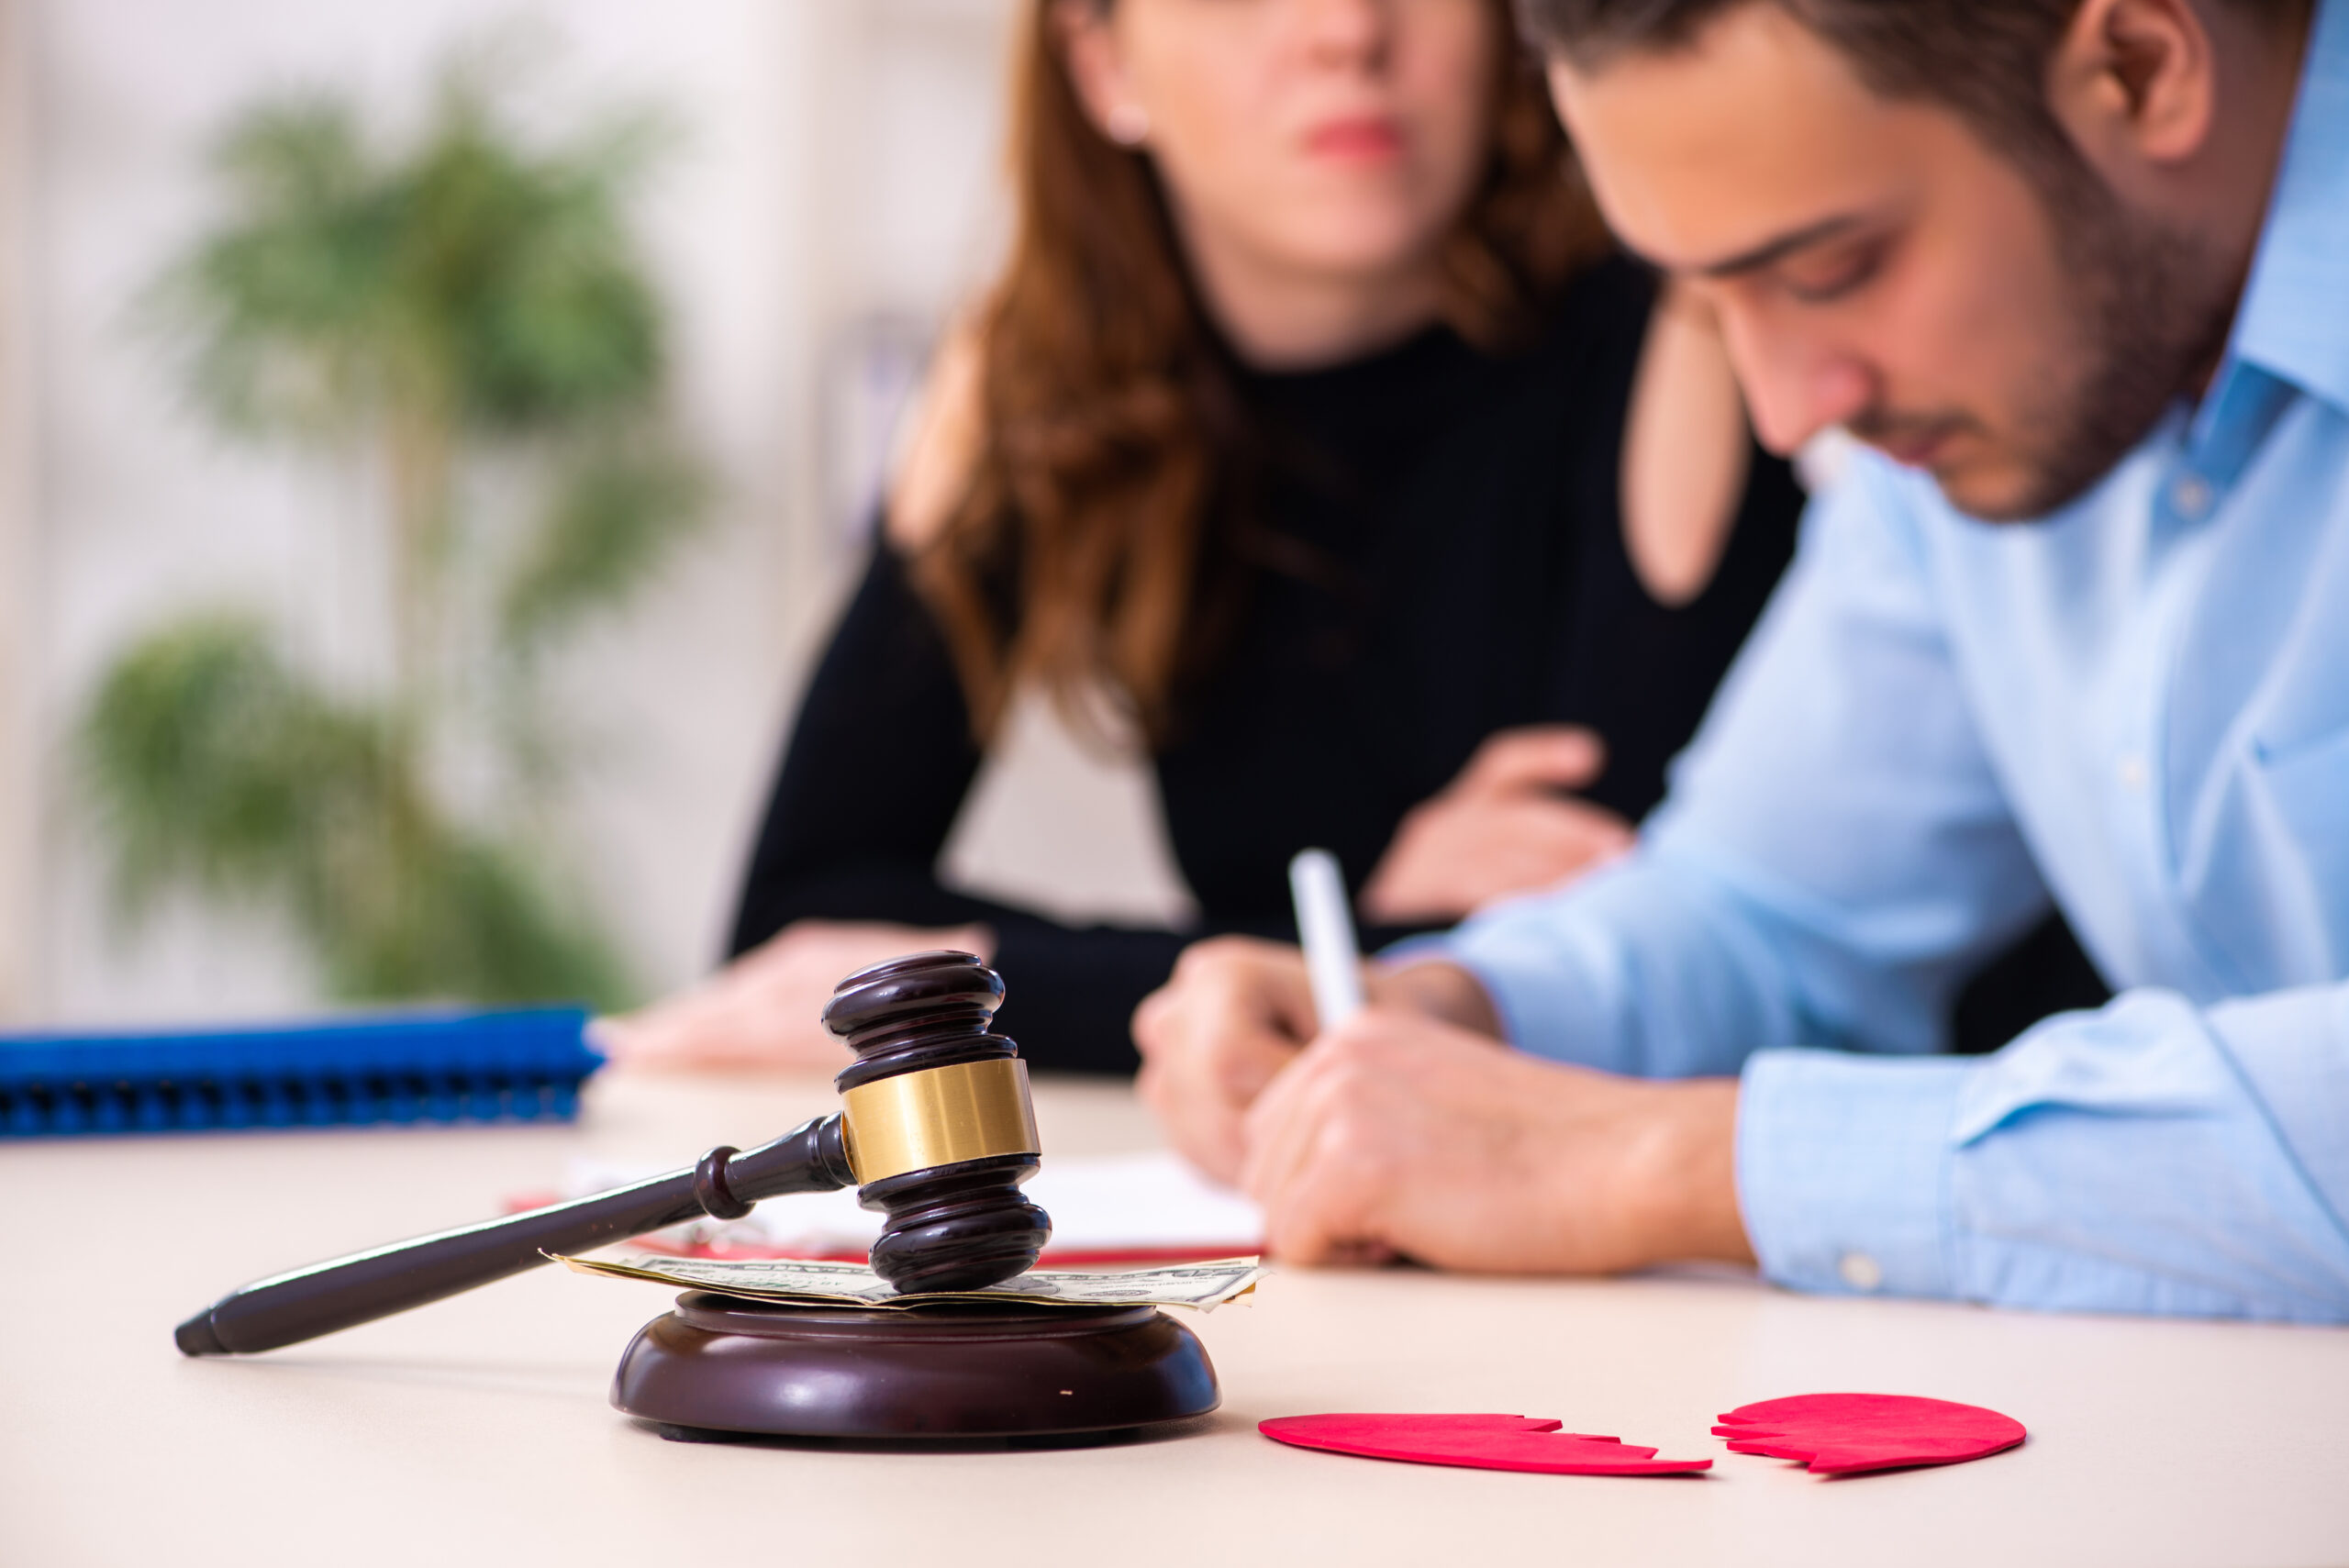 How Does Alimony Work? An Essential Guide for Understanding Alimony Laws